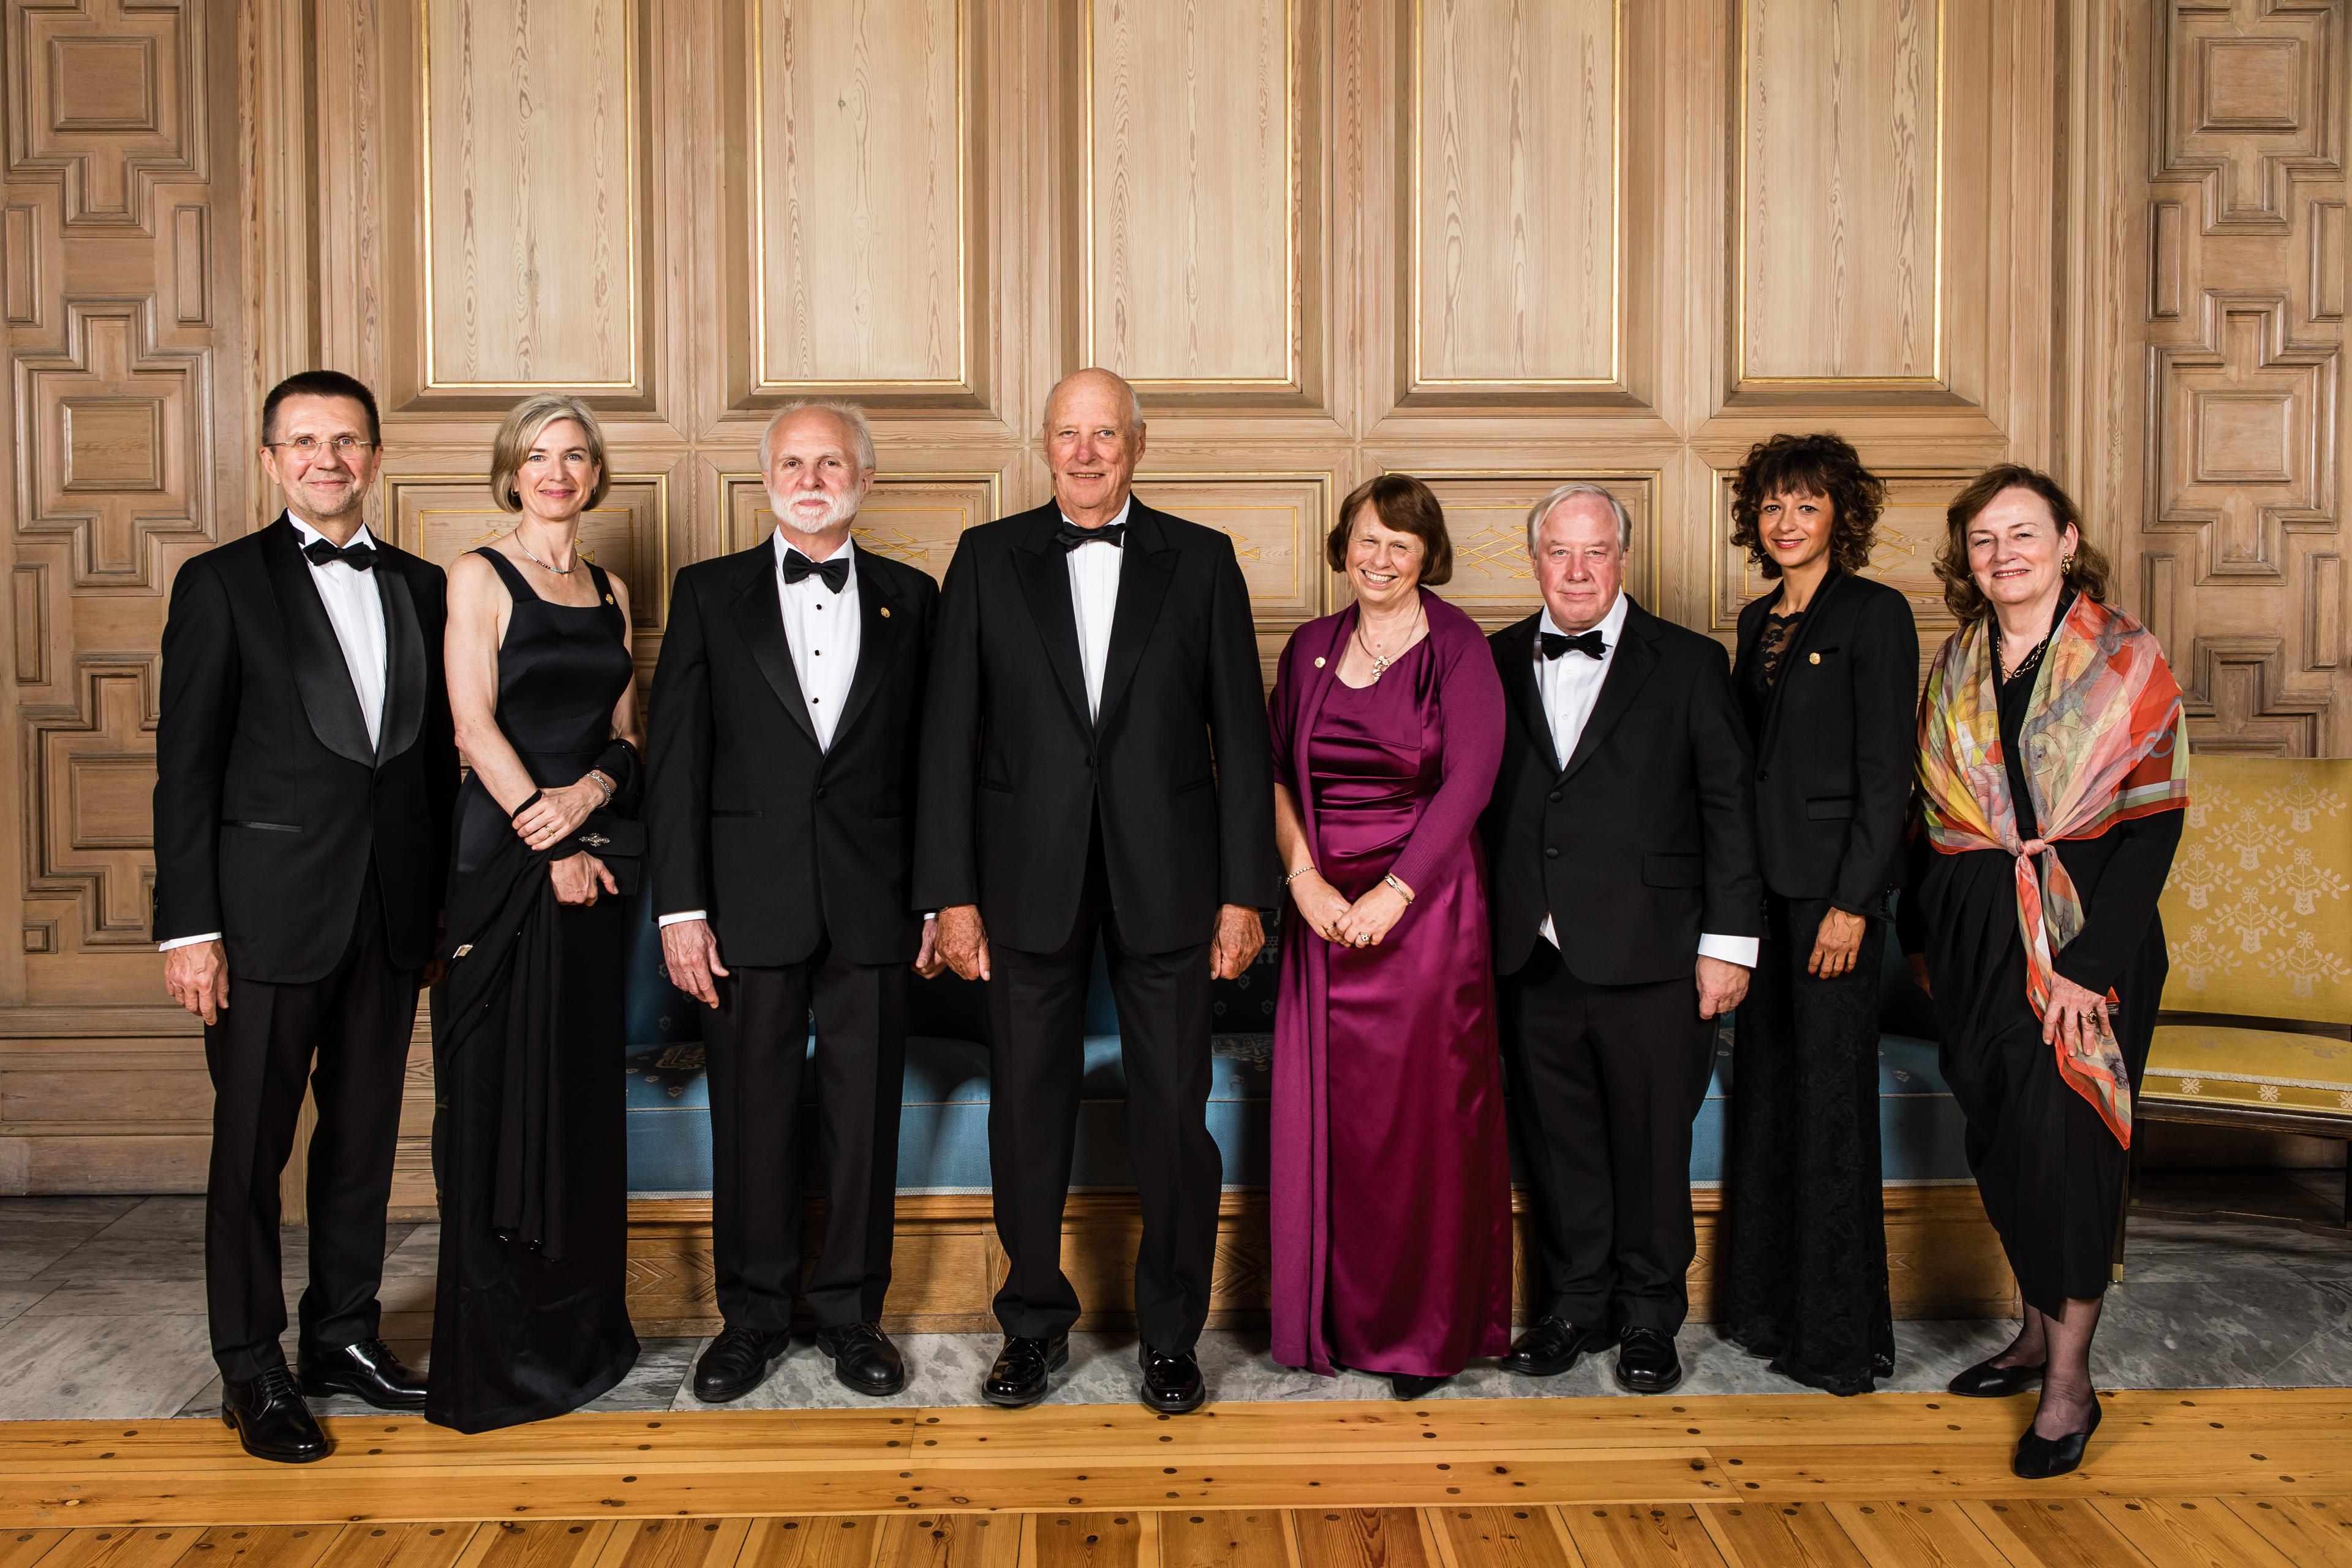 The 2018 laureates at the reception in the Munch room at Oslo City Hall